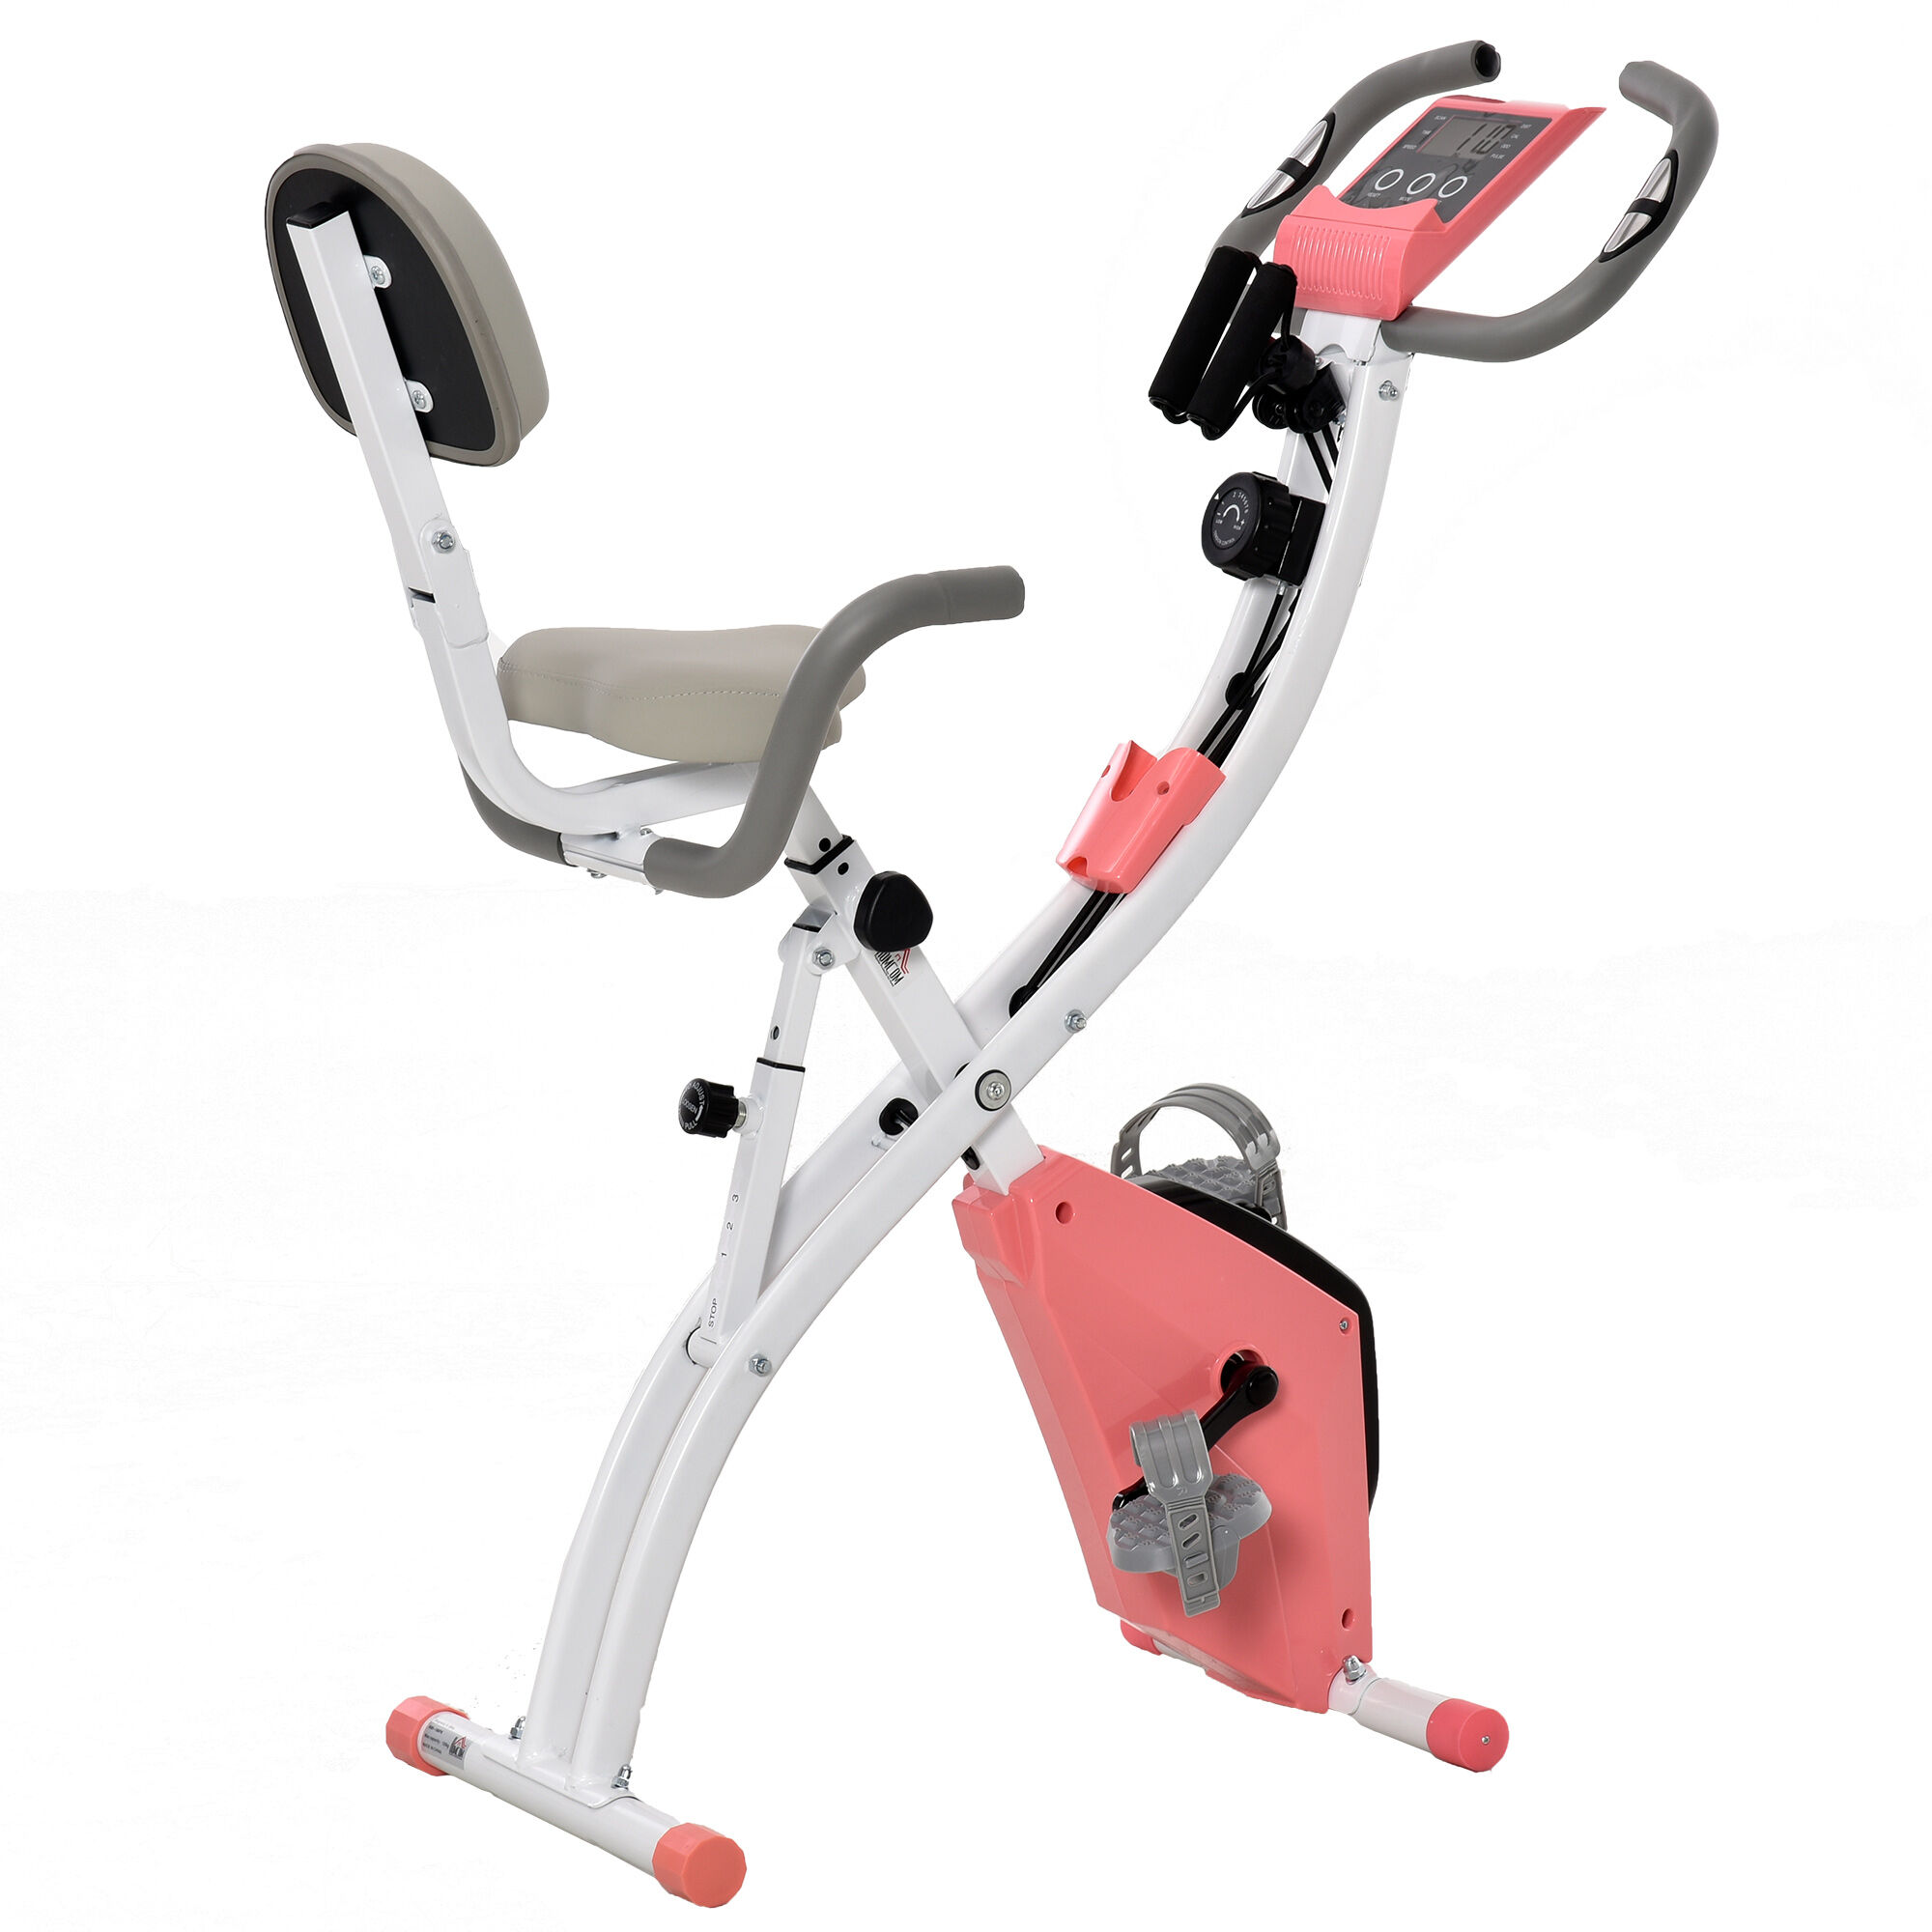 HOMCOM 2-in-1 Upright  Exercise Bike Stationary Foldable Magnetic Recumbent Cycling with Arm Resistance Bands Pink